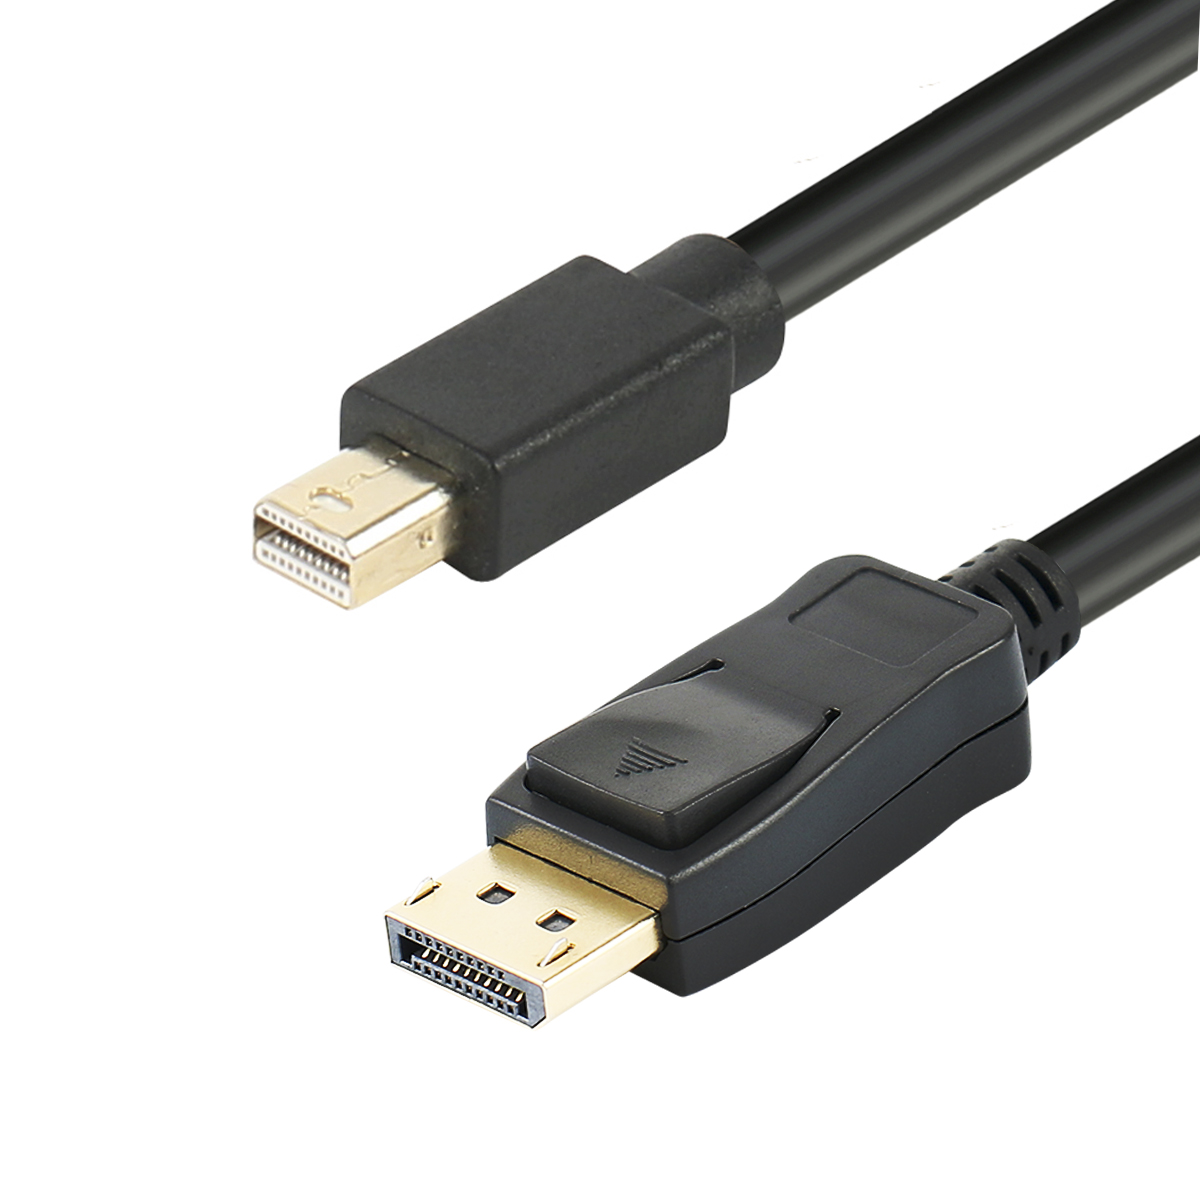 Lenovo Dell and Other Brand Renewed Mini DisplayPort to DisplayPort 4K@60Hz 6 Feet Cable Benfei Mini DP to Display Port Adapter Male to Male Gold-Plated Cord Compatible for MacBook Thunderbolt Compatible 